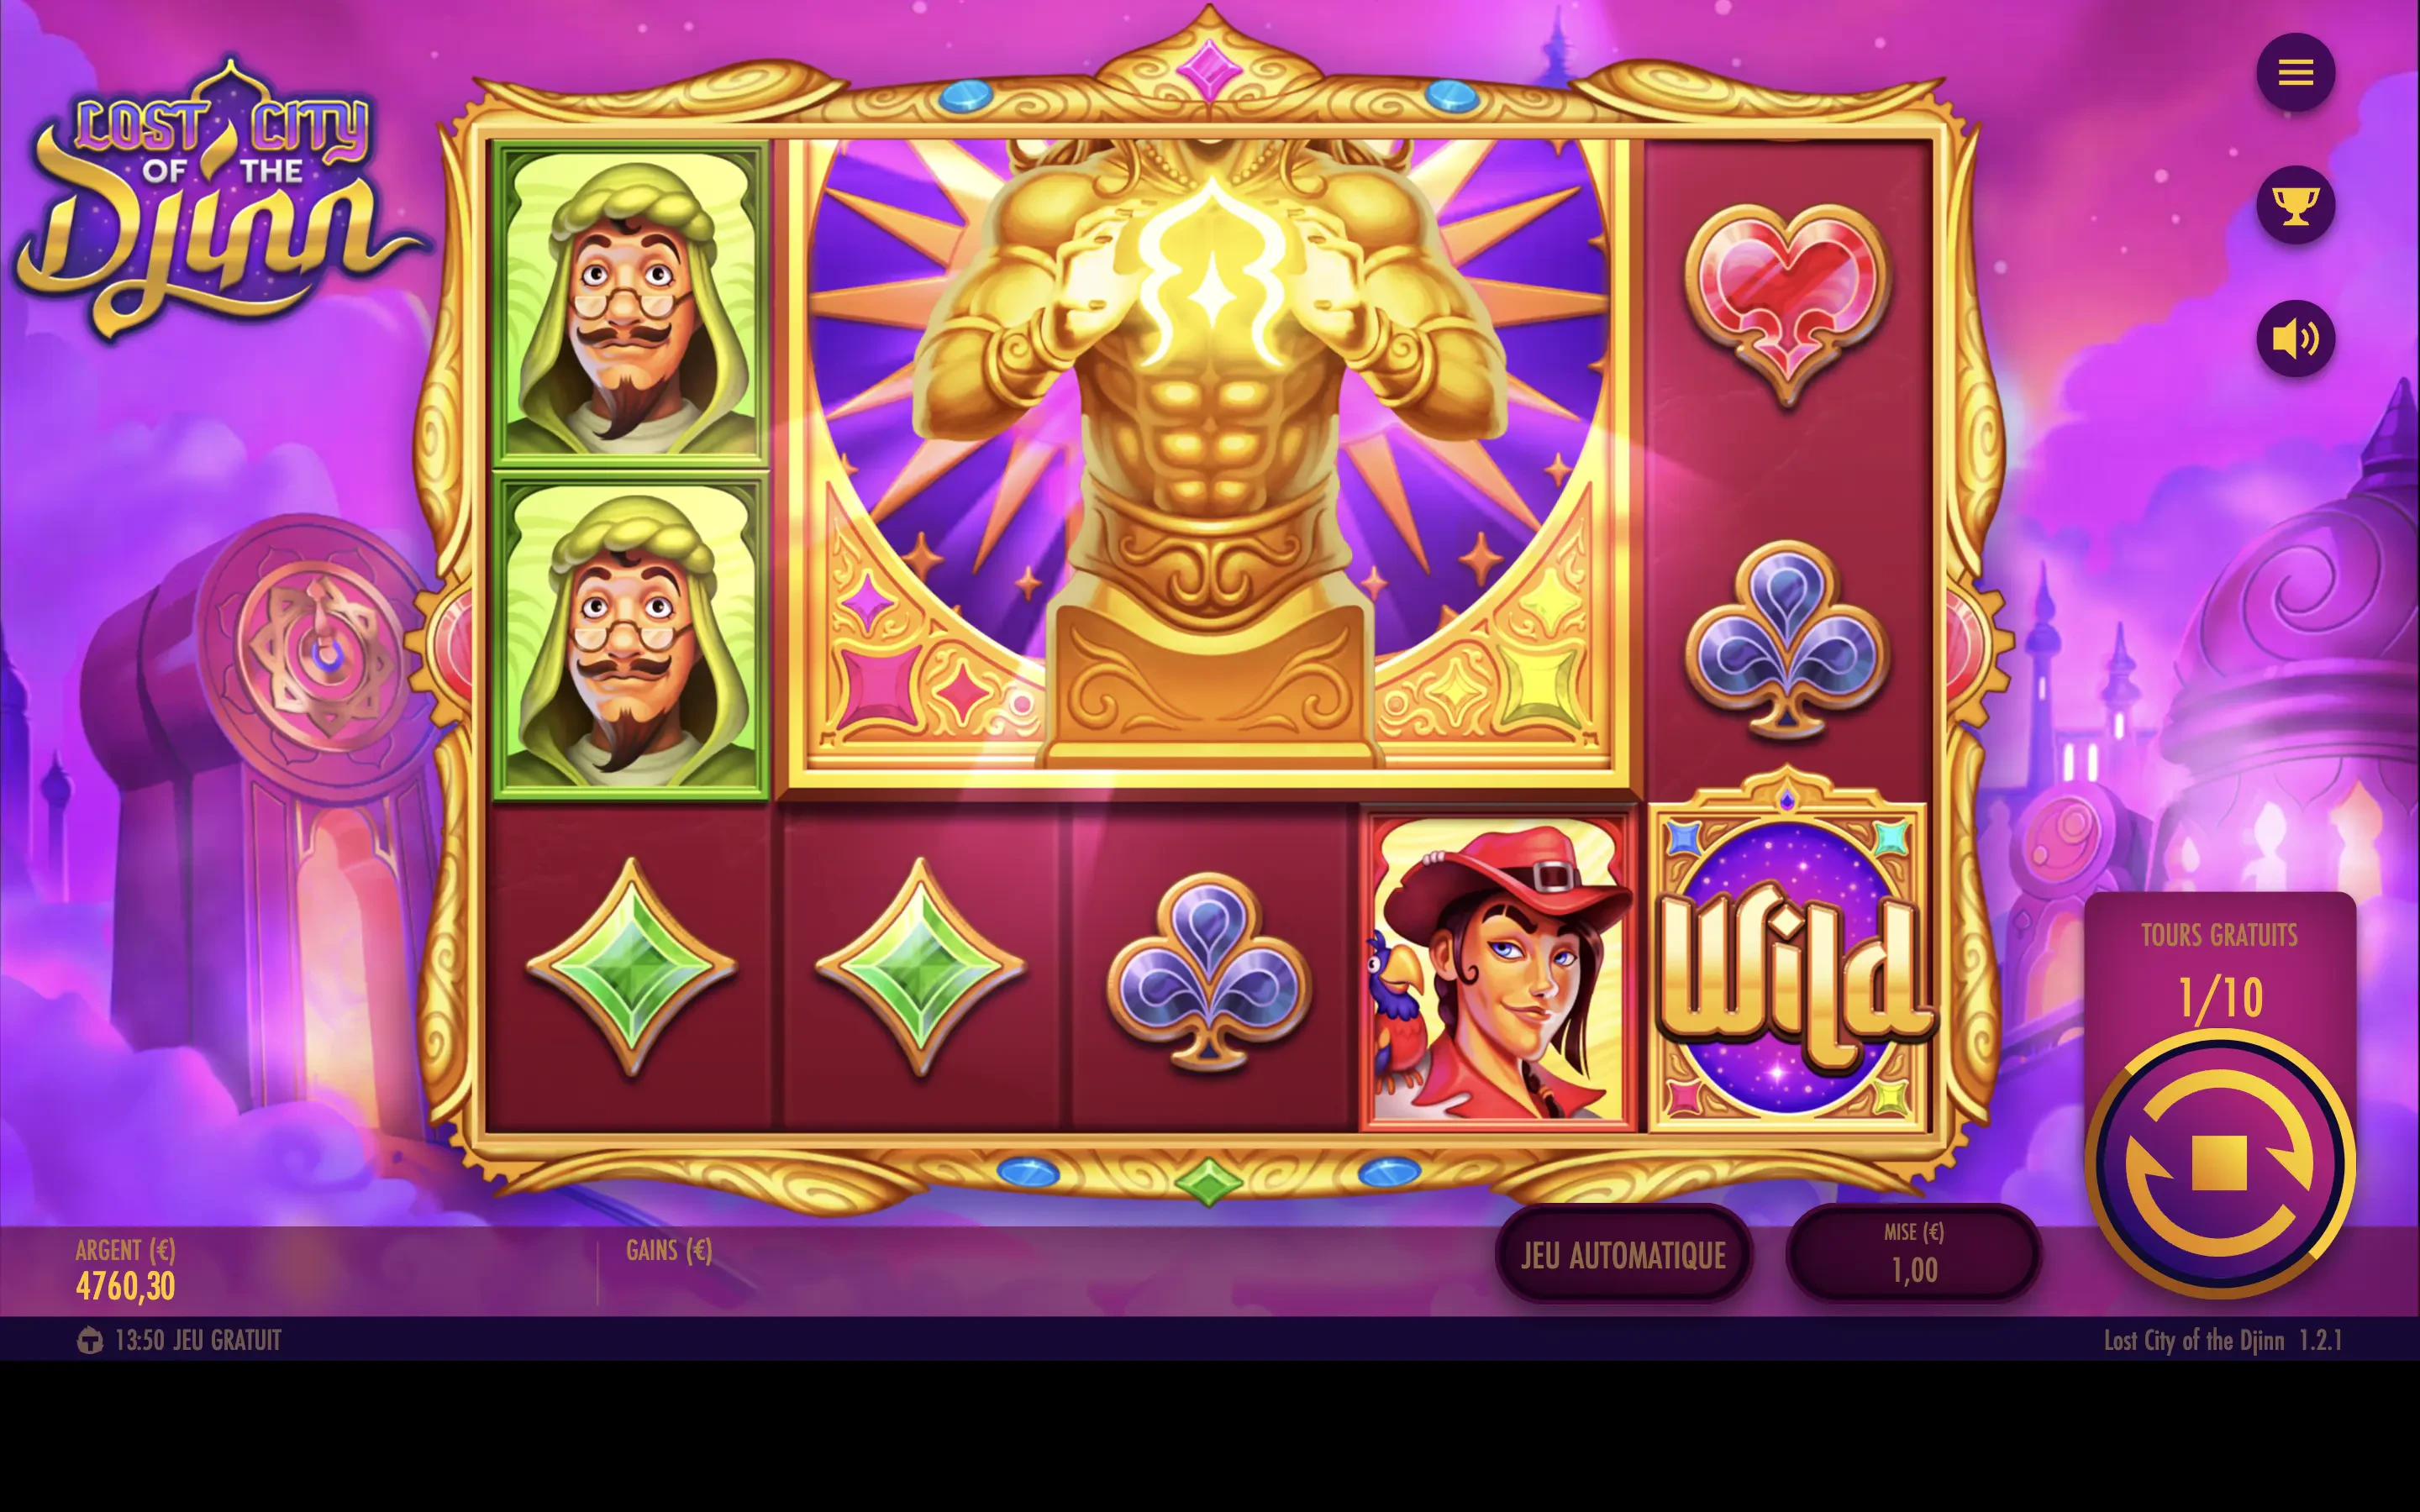 Lost City of the Djinn free spins